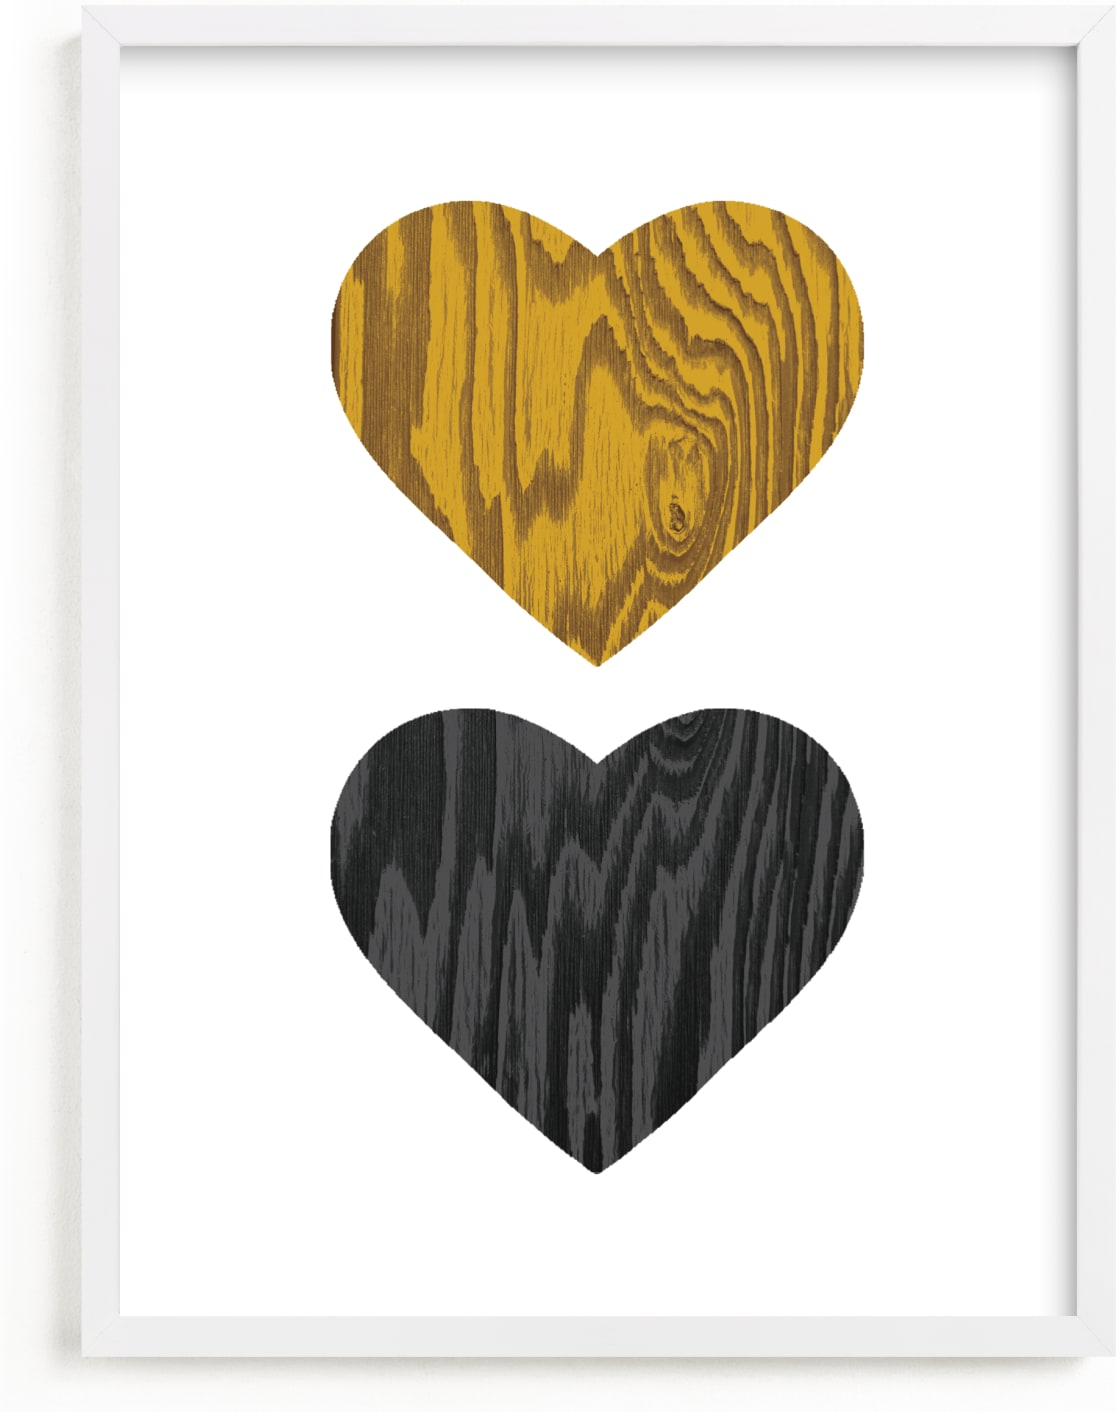 This is a yellow nursery wall art by Max and Bunny called Wood Grain Hearts.